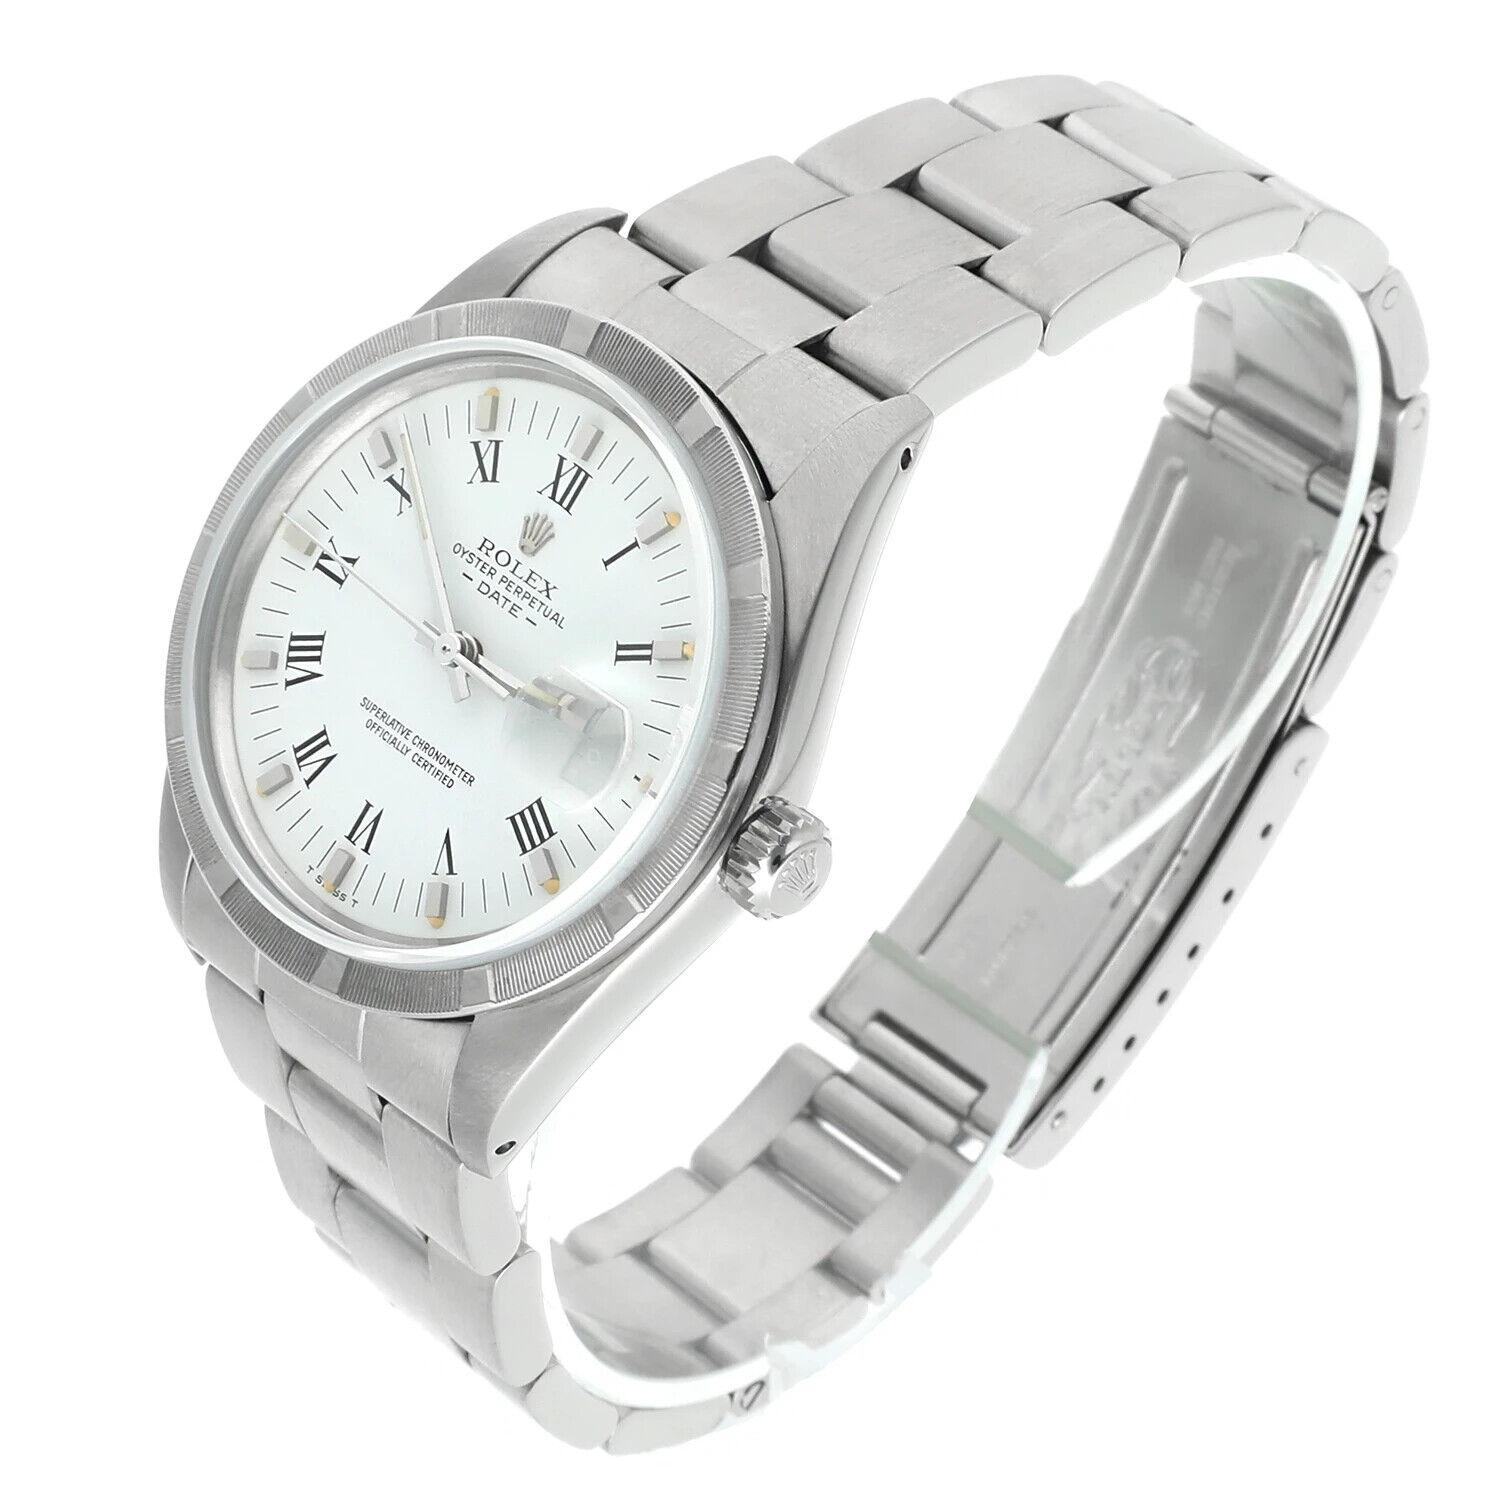 Women's Unisex Rolex Date Stainless Steel Watch Oyster White Roman Dial 15010 Circa 1988 For Sale